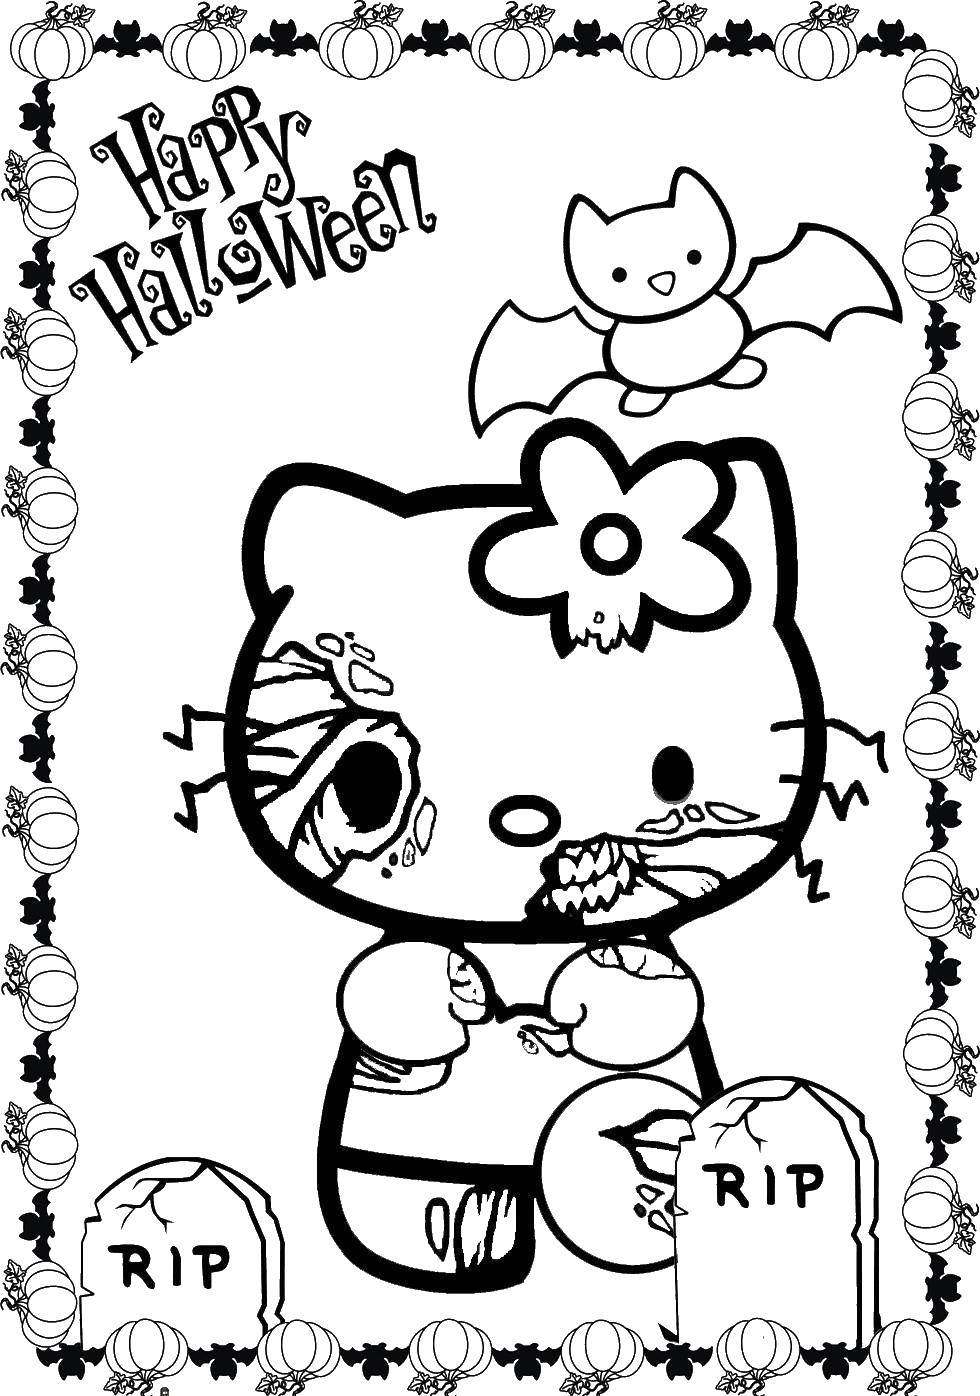 Coloring Kitty zombie Halloween. Category Kitty . Tags:  Halloween, kitty.